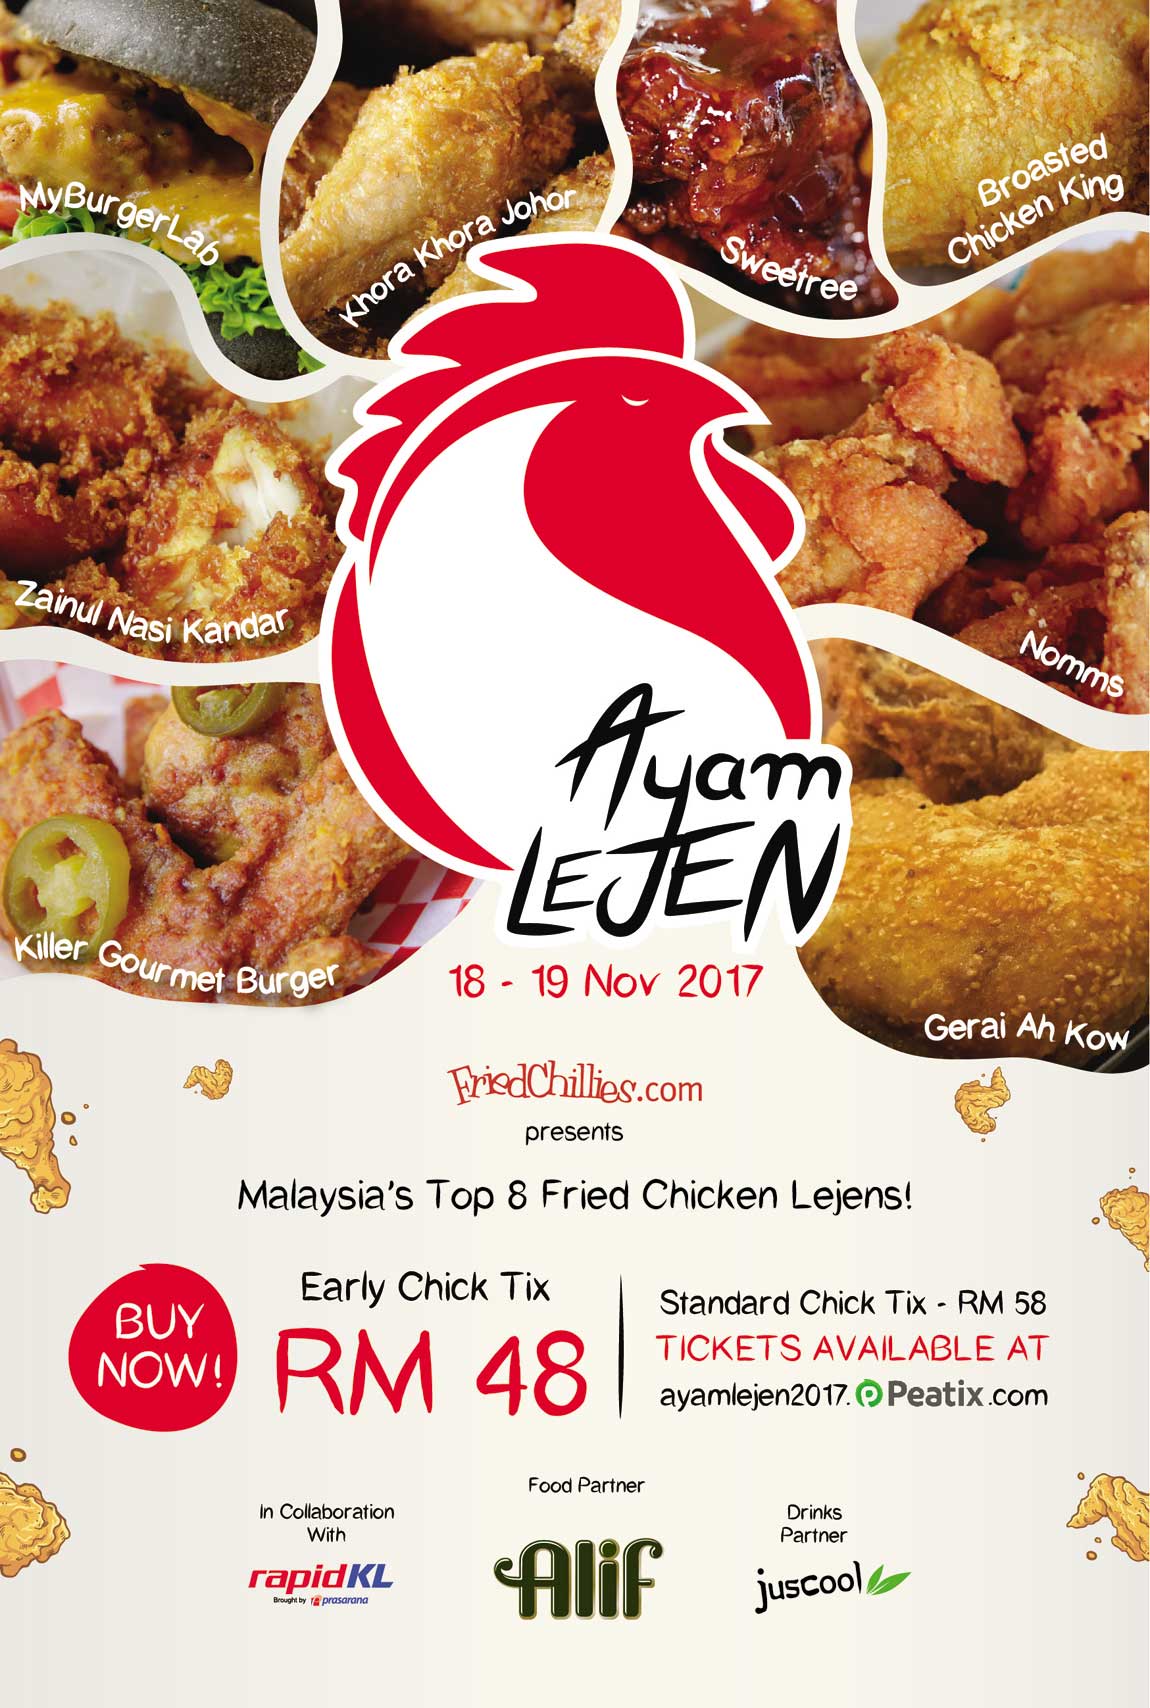 Calling All Fried Chicken Lovers! The 1st Fried Chicken Festival Is Coming To KL This November - WORLD OF BUZZ